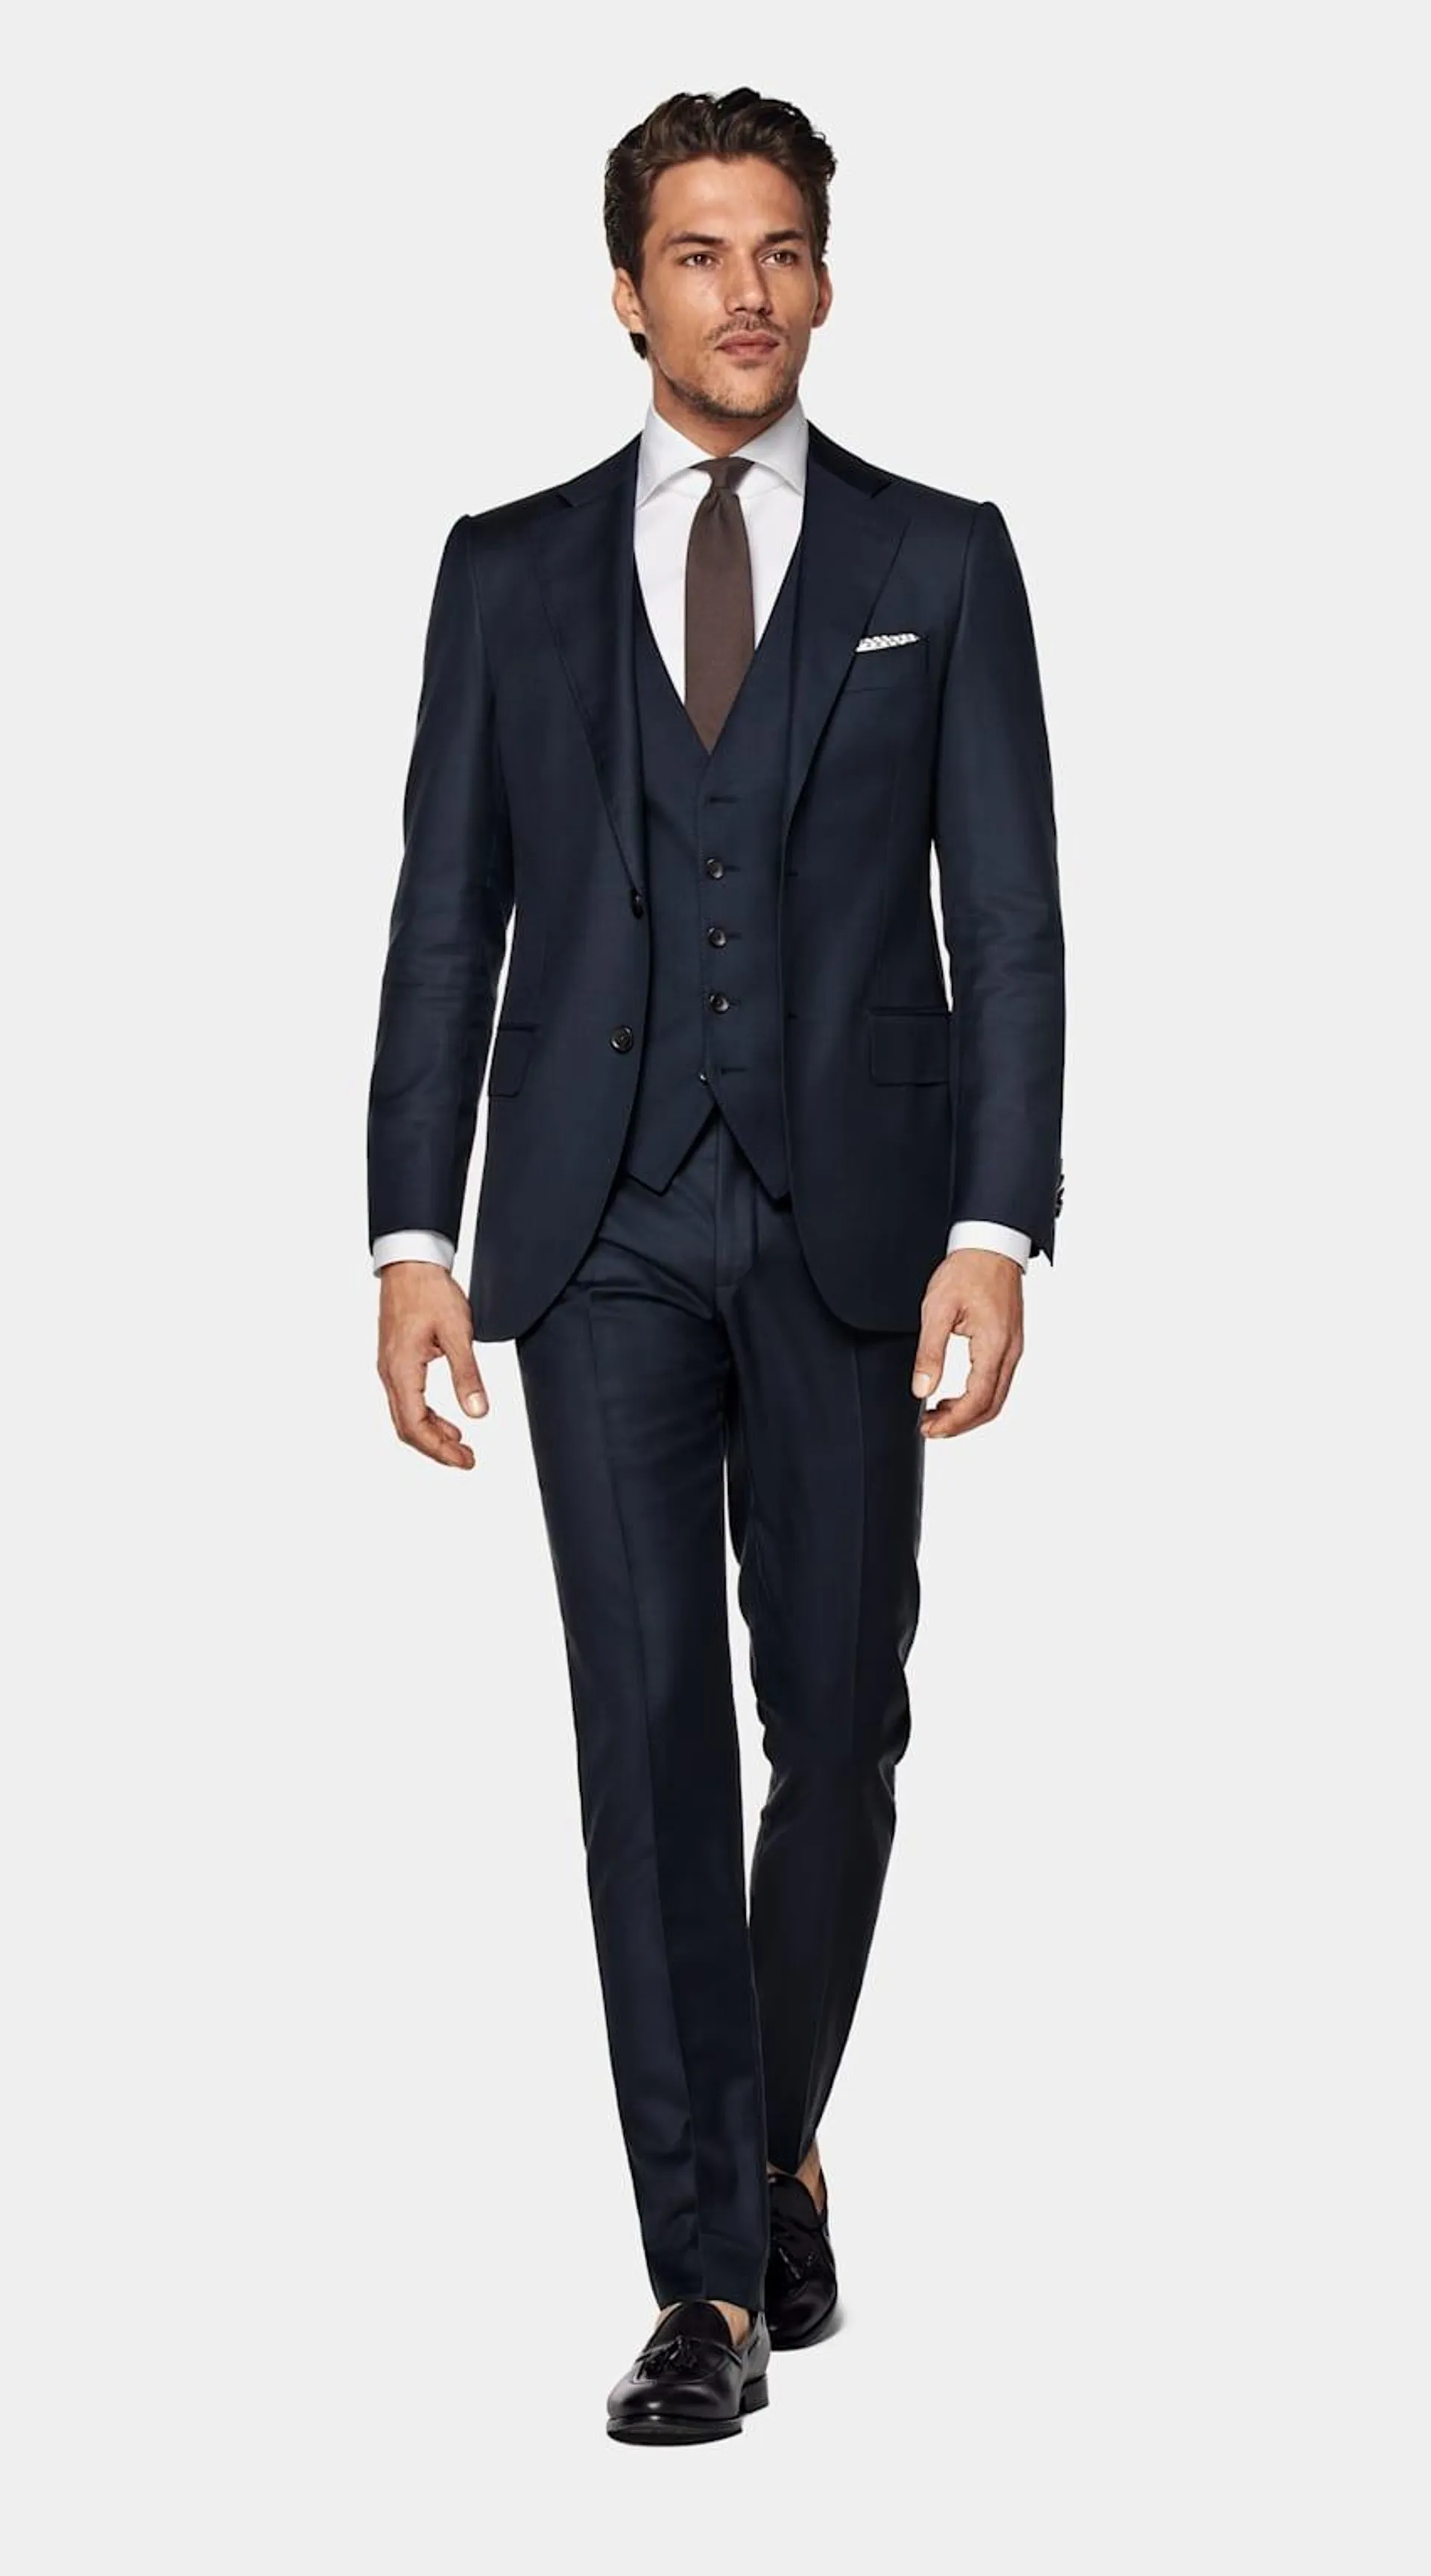 A well-rounded pick for just about any occasion, this handsome navy Lazio suit jacket is tailored to a slim fit from pure S110's wool by Italy's Vitale Barberis Canonico.